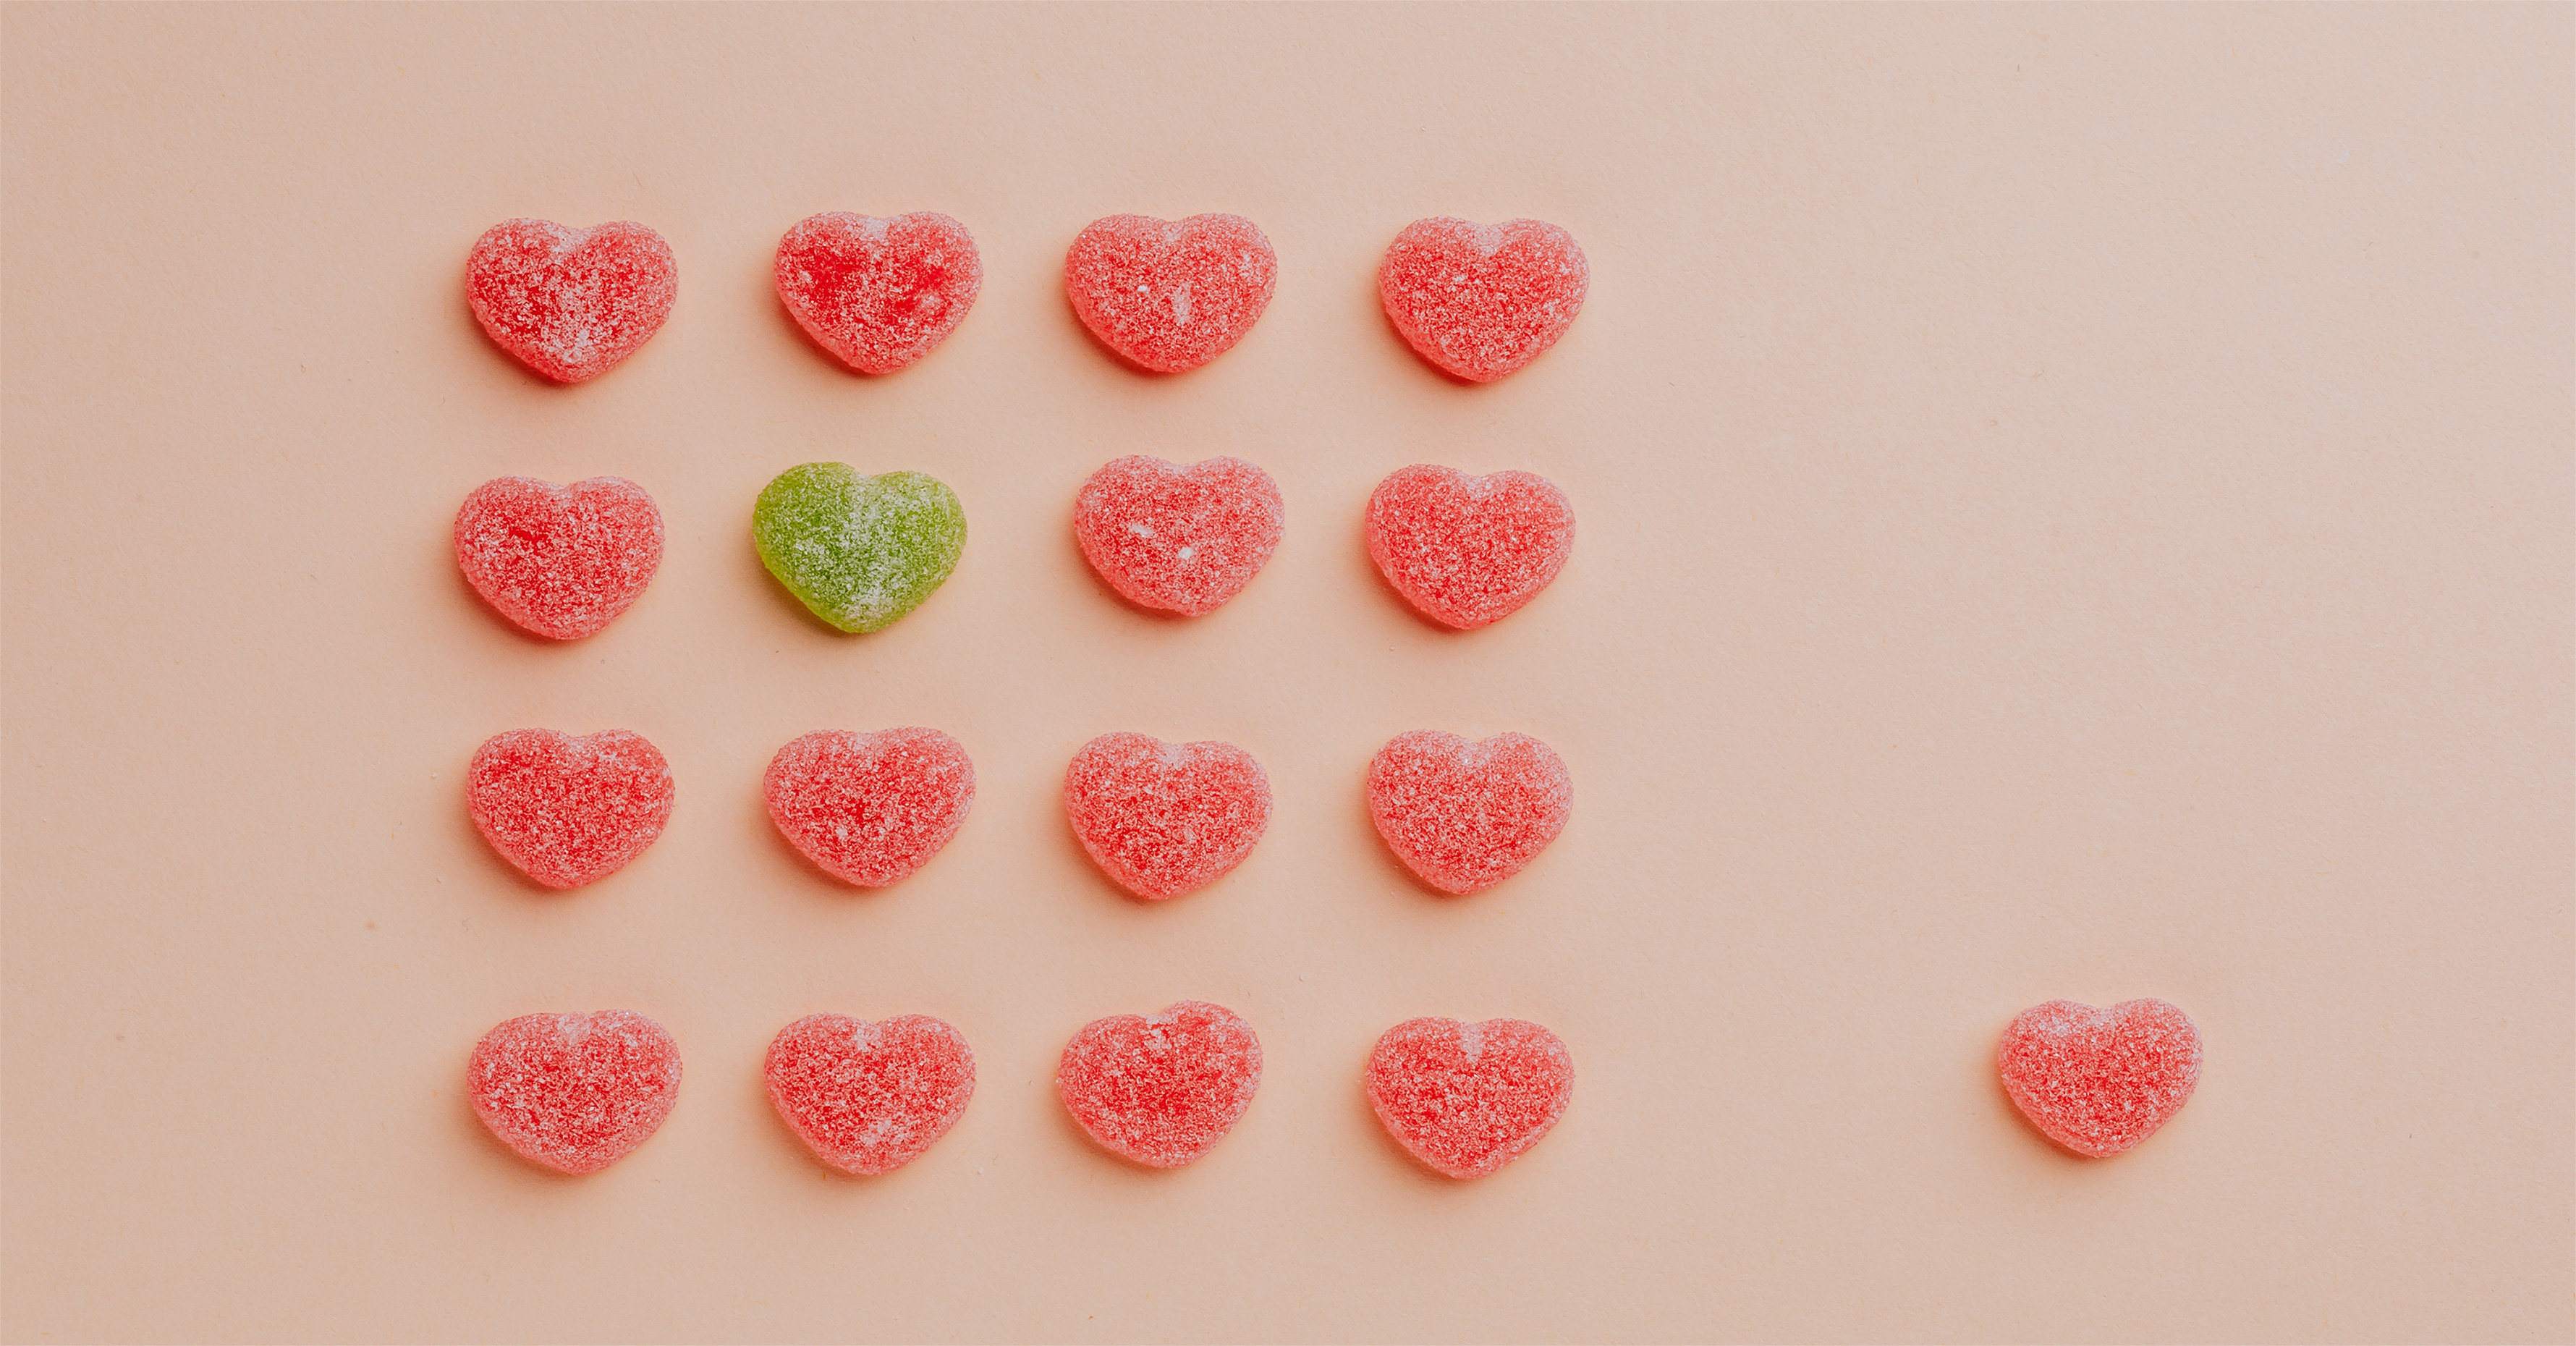 Red hearts in a row with one green heart standing out